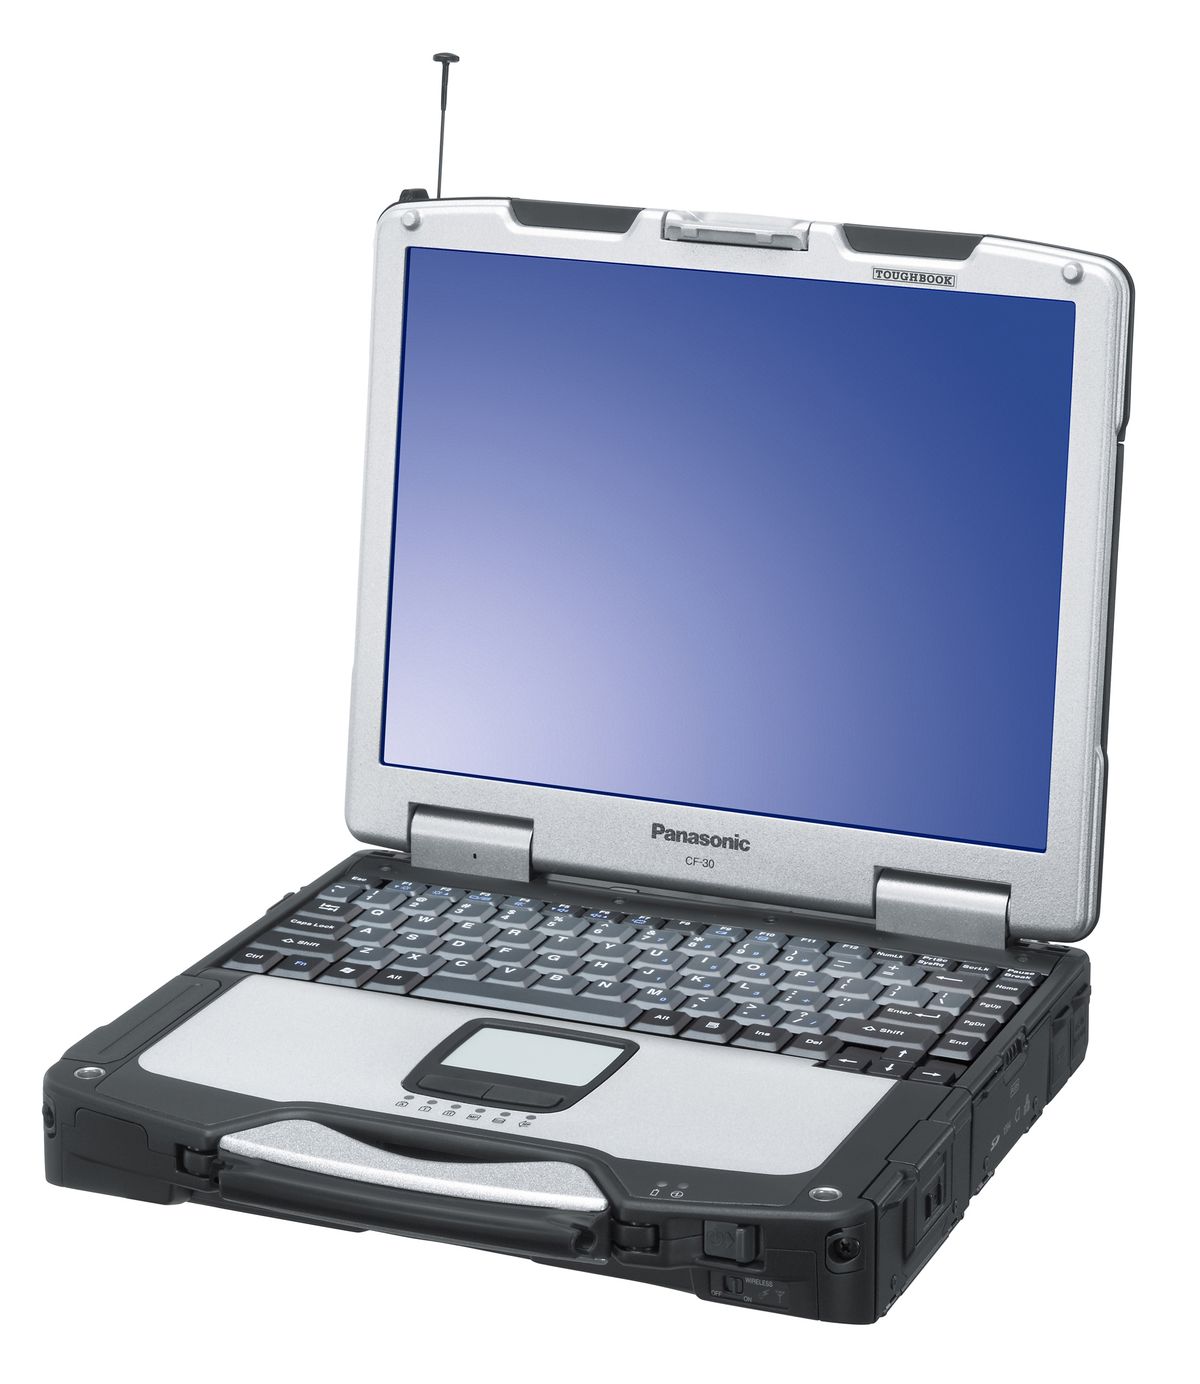 Panasonic ToughBook CF-30 Intel Core Duo 1600 MHz 80GB HDD 3072mb 13.0” WideScreen LCD Windows 7 Pro 32 Bit USED - image 2 of 4